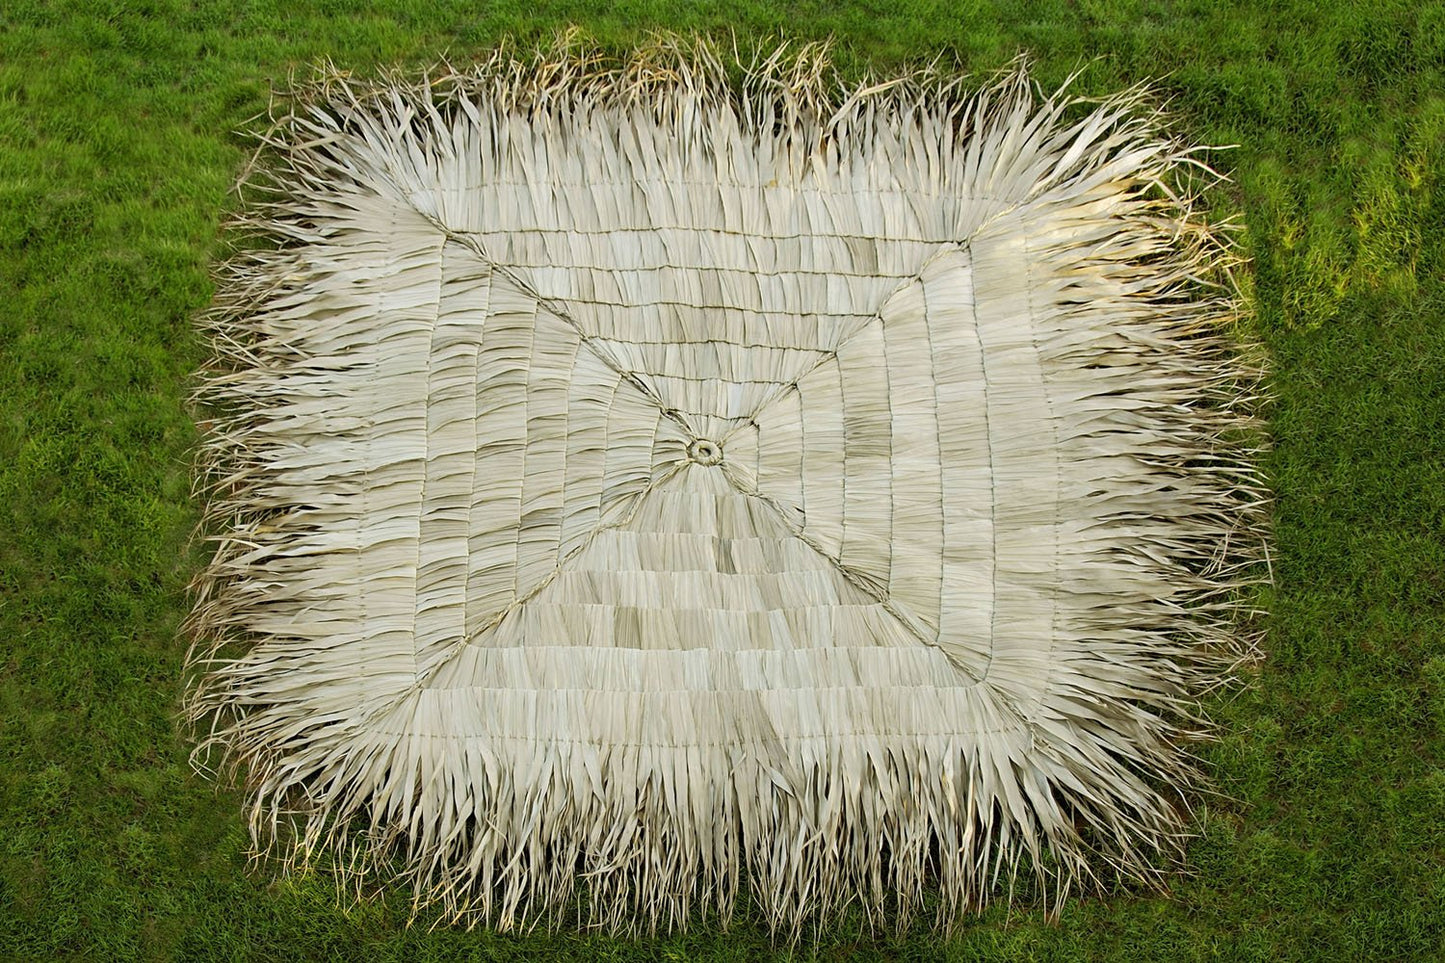 12' x 12' Square Asian Thatch Cover - My Store